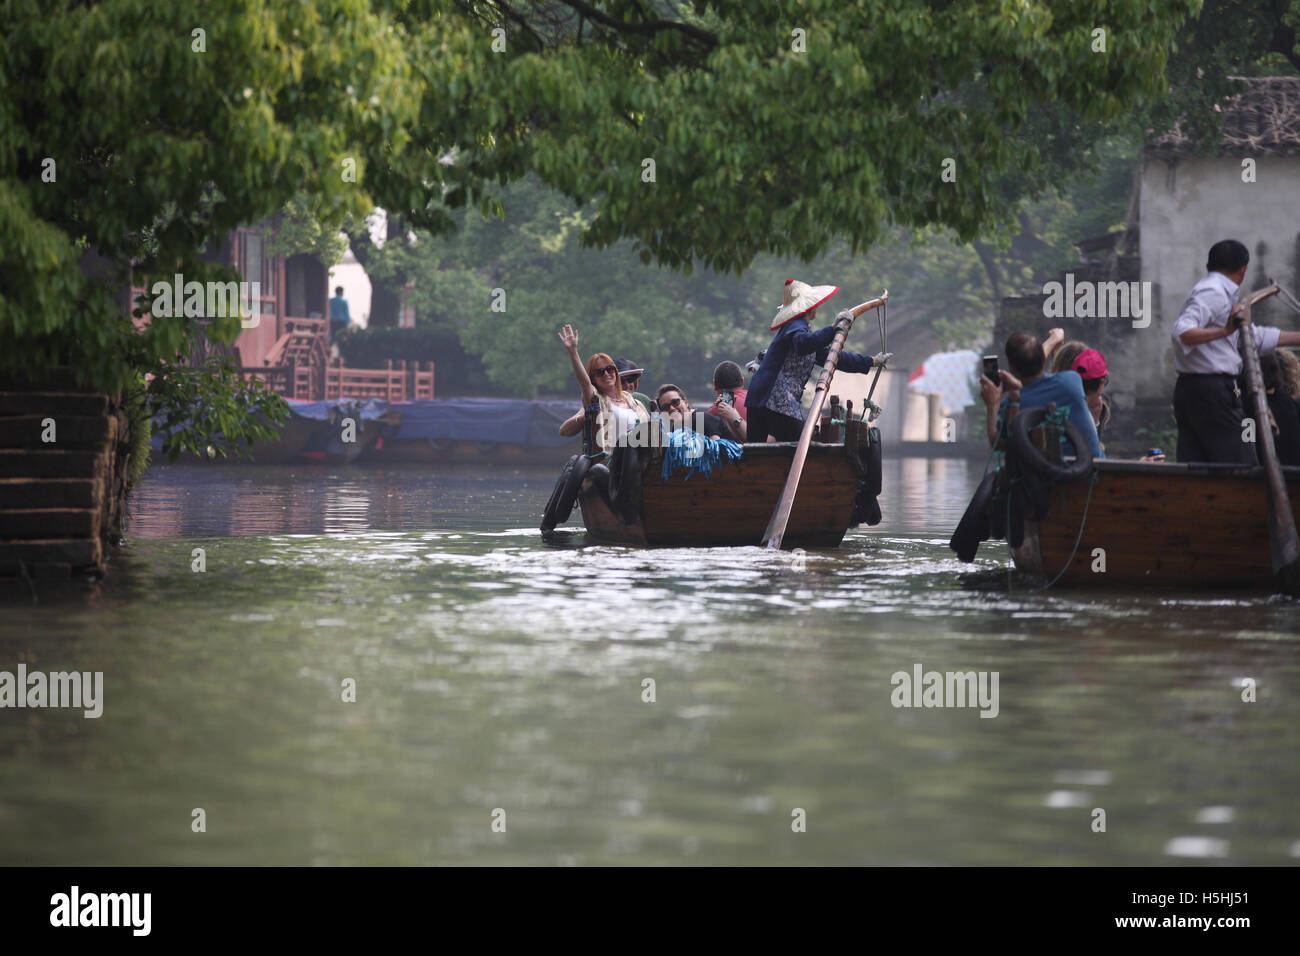 Israeli tourists ride boats in a Tongli canal, an old Chinese town near Suzhou, in one of the boats a woman is rowing, in the other a man. China. Stock Photo